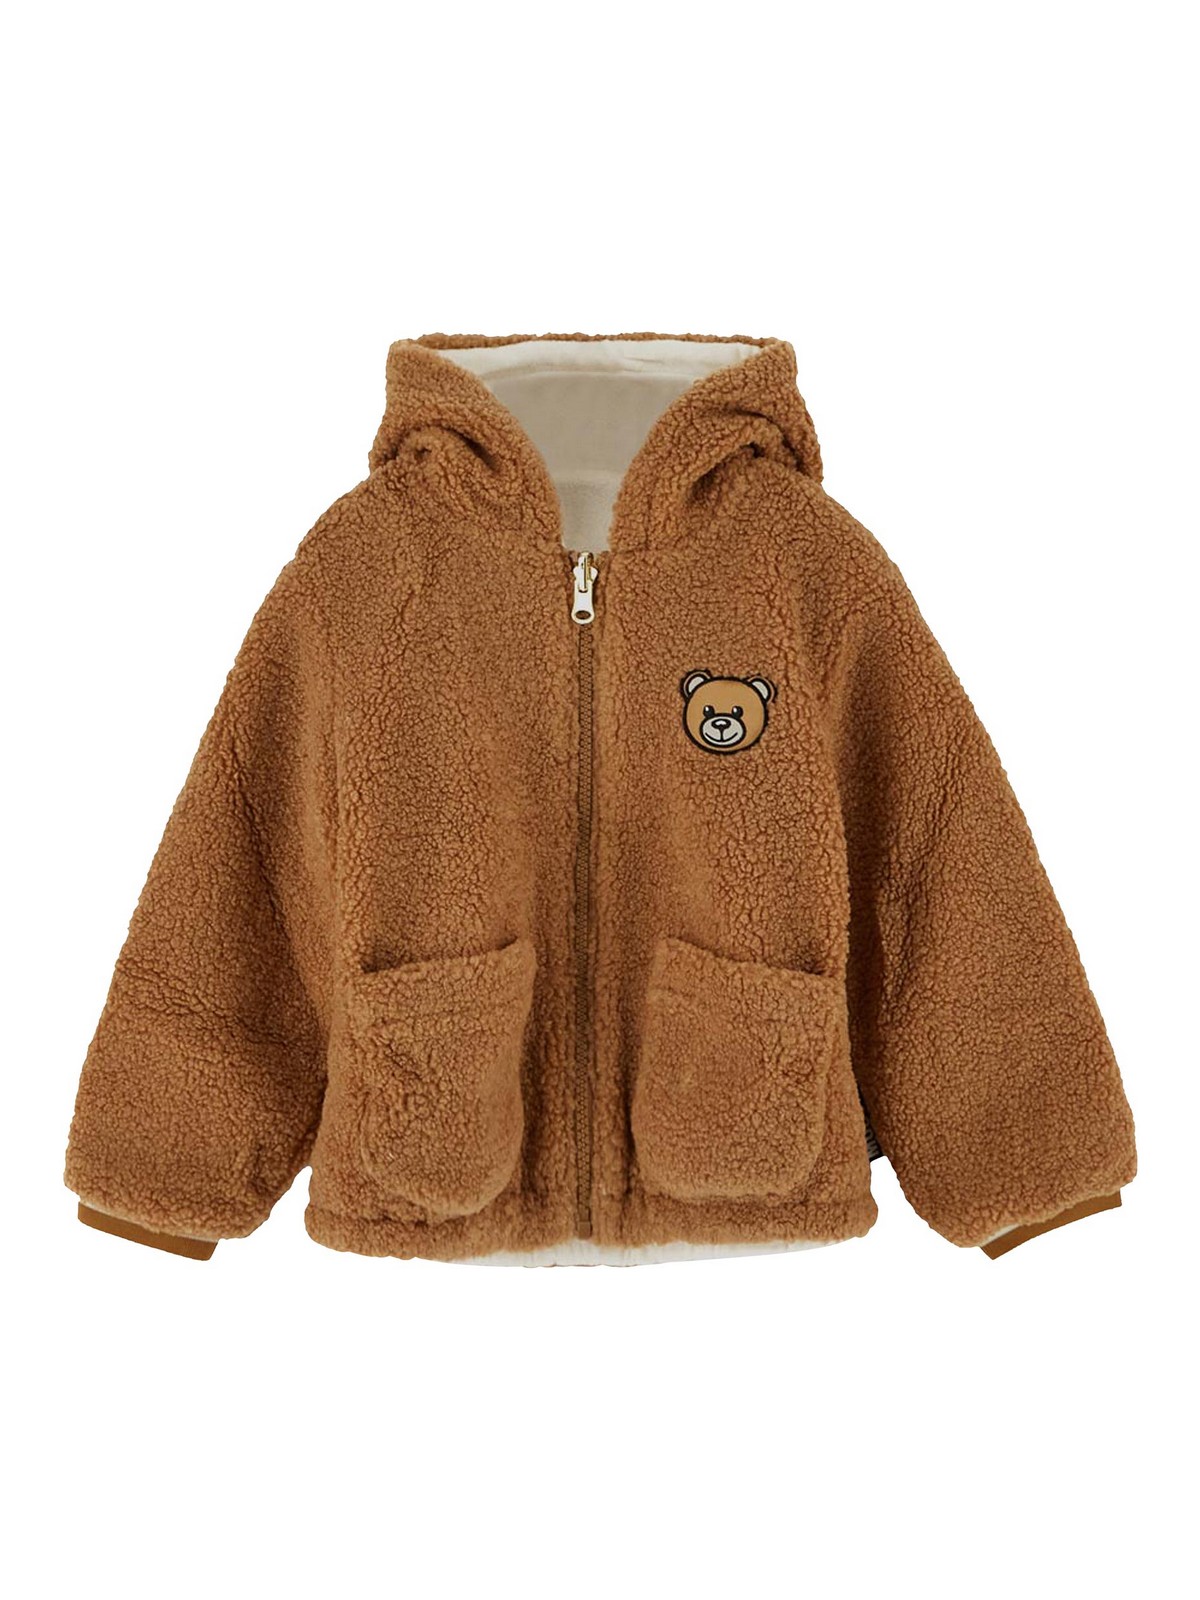 Moschino Kids' Brown Jacket With Long Sleeves